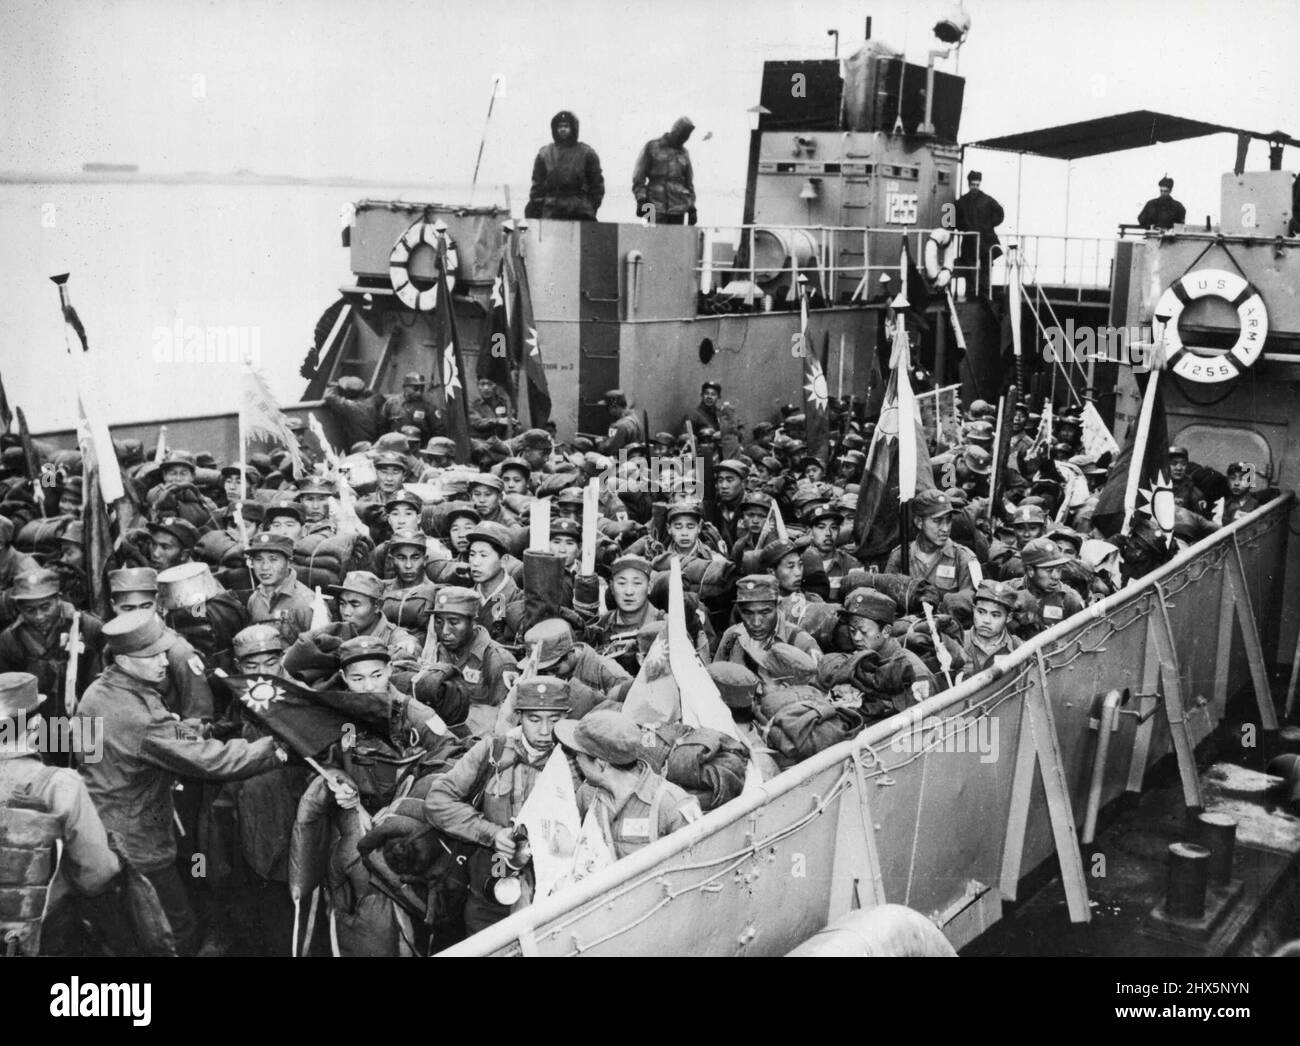 Anti-Communist Pows Freed -- Anti-Communists North Korean prisoners of war are welcomed as they arrive in Seoul after their recent release. January 26, 1954. Stock Photo